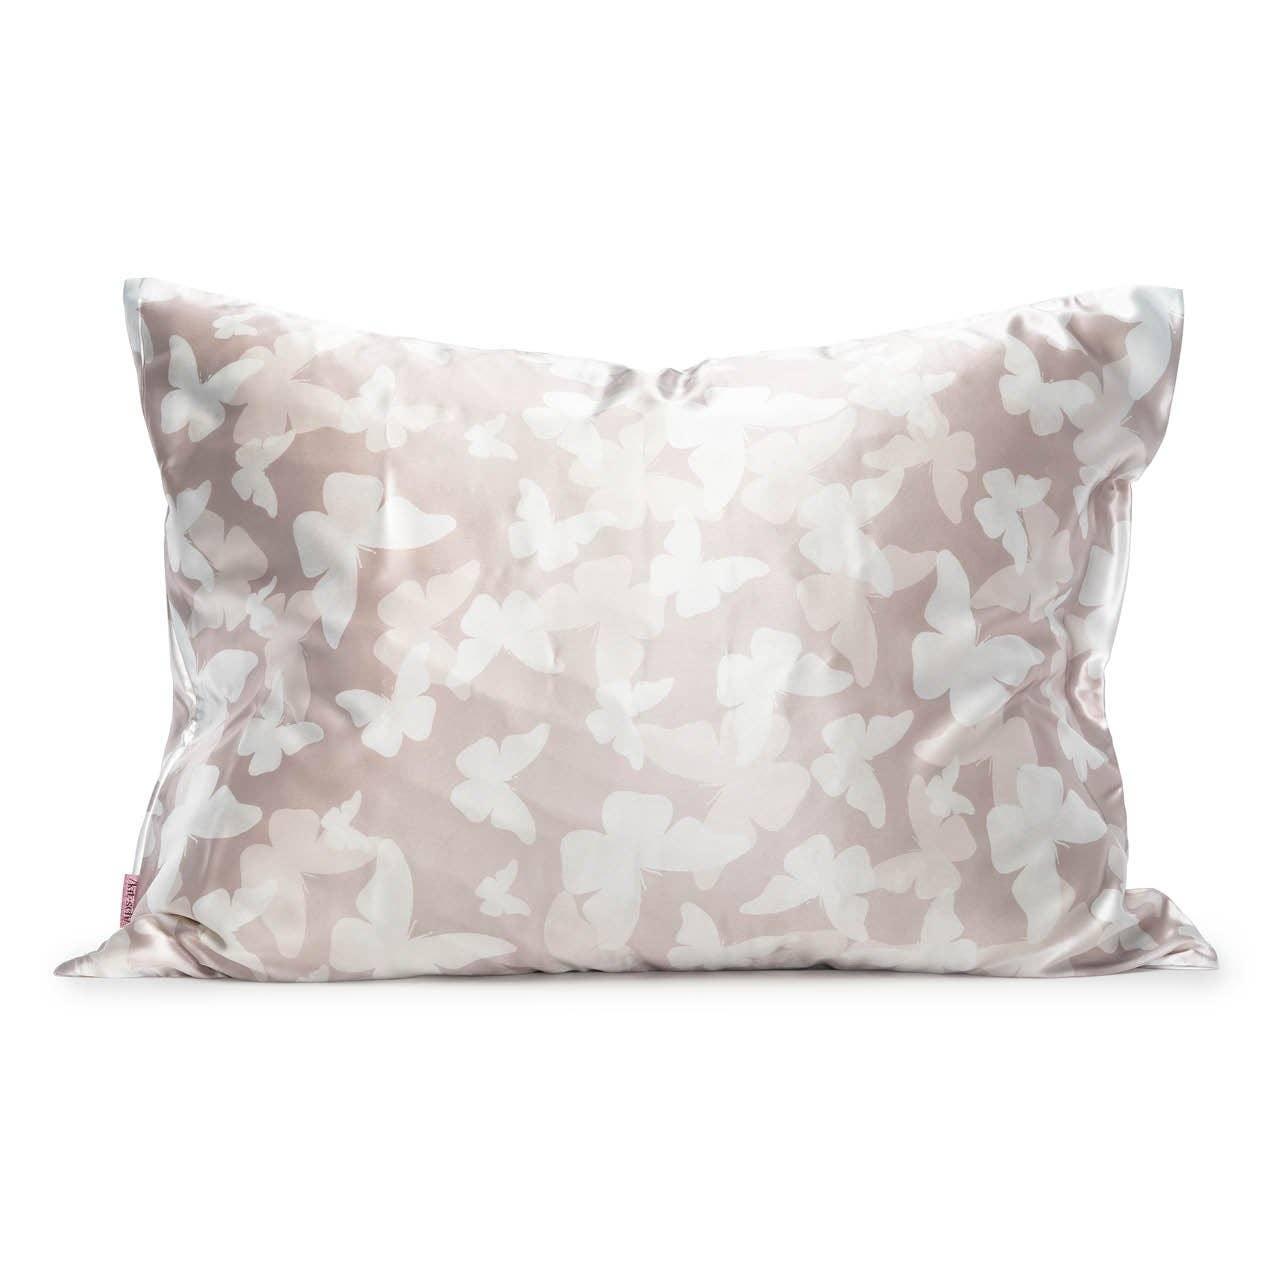 Satin Pillowcase - Champagne Butterfly - The Silver Dahlia